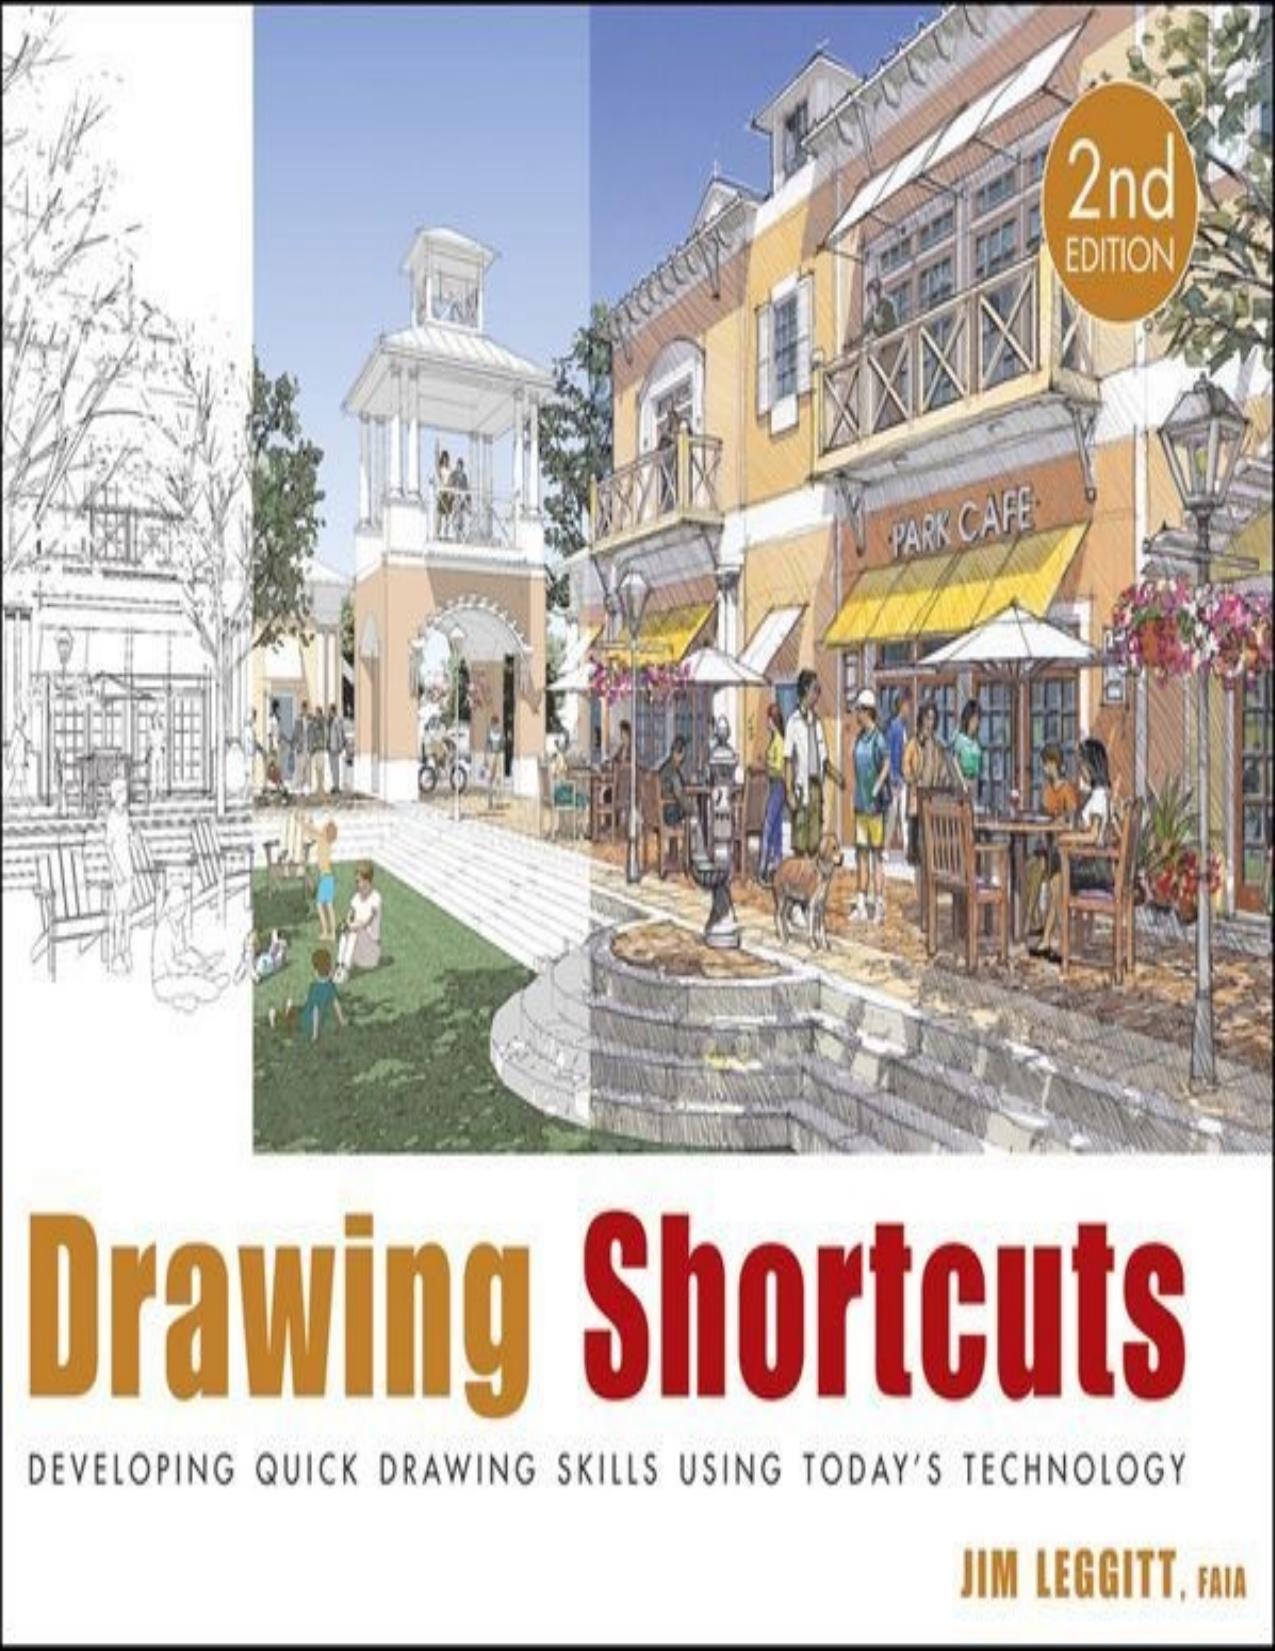 Drawing Shortcuts: Developing Quick Drawing Skills Using Today\'s Technology - PDFDrive.com